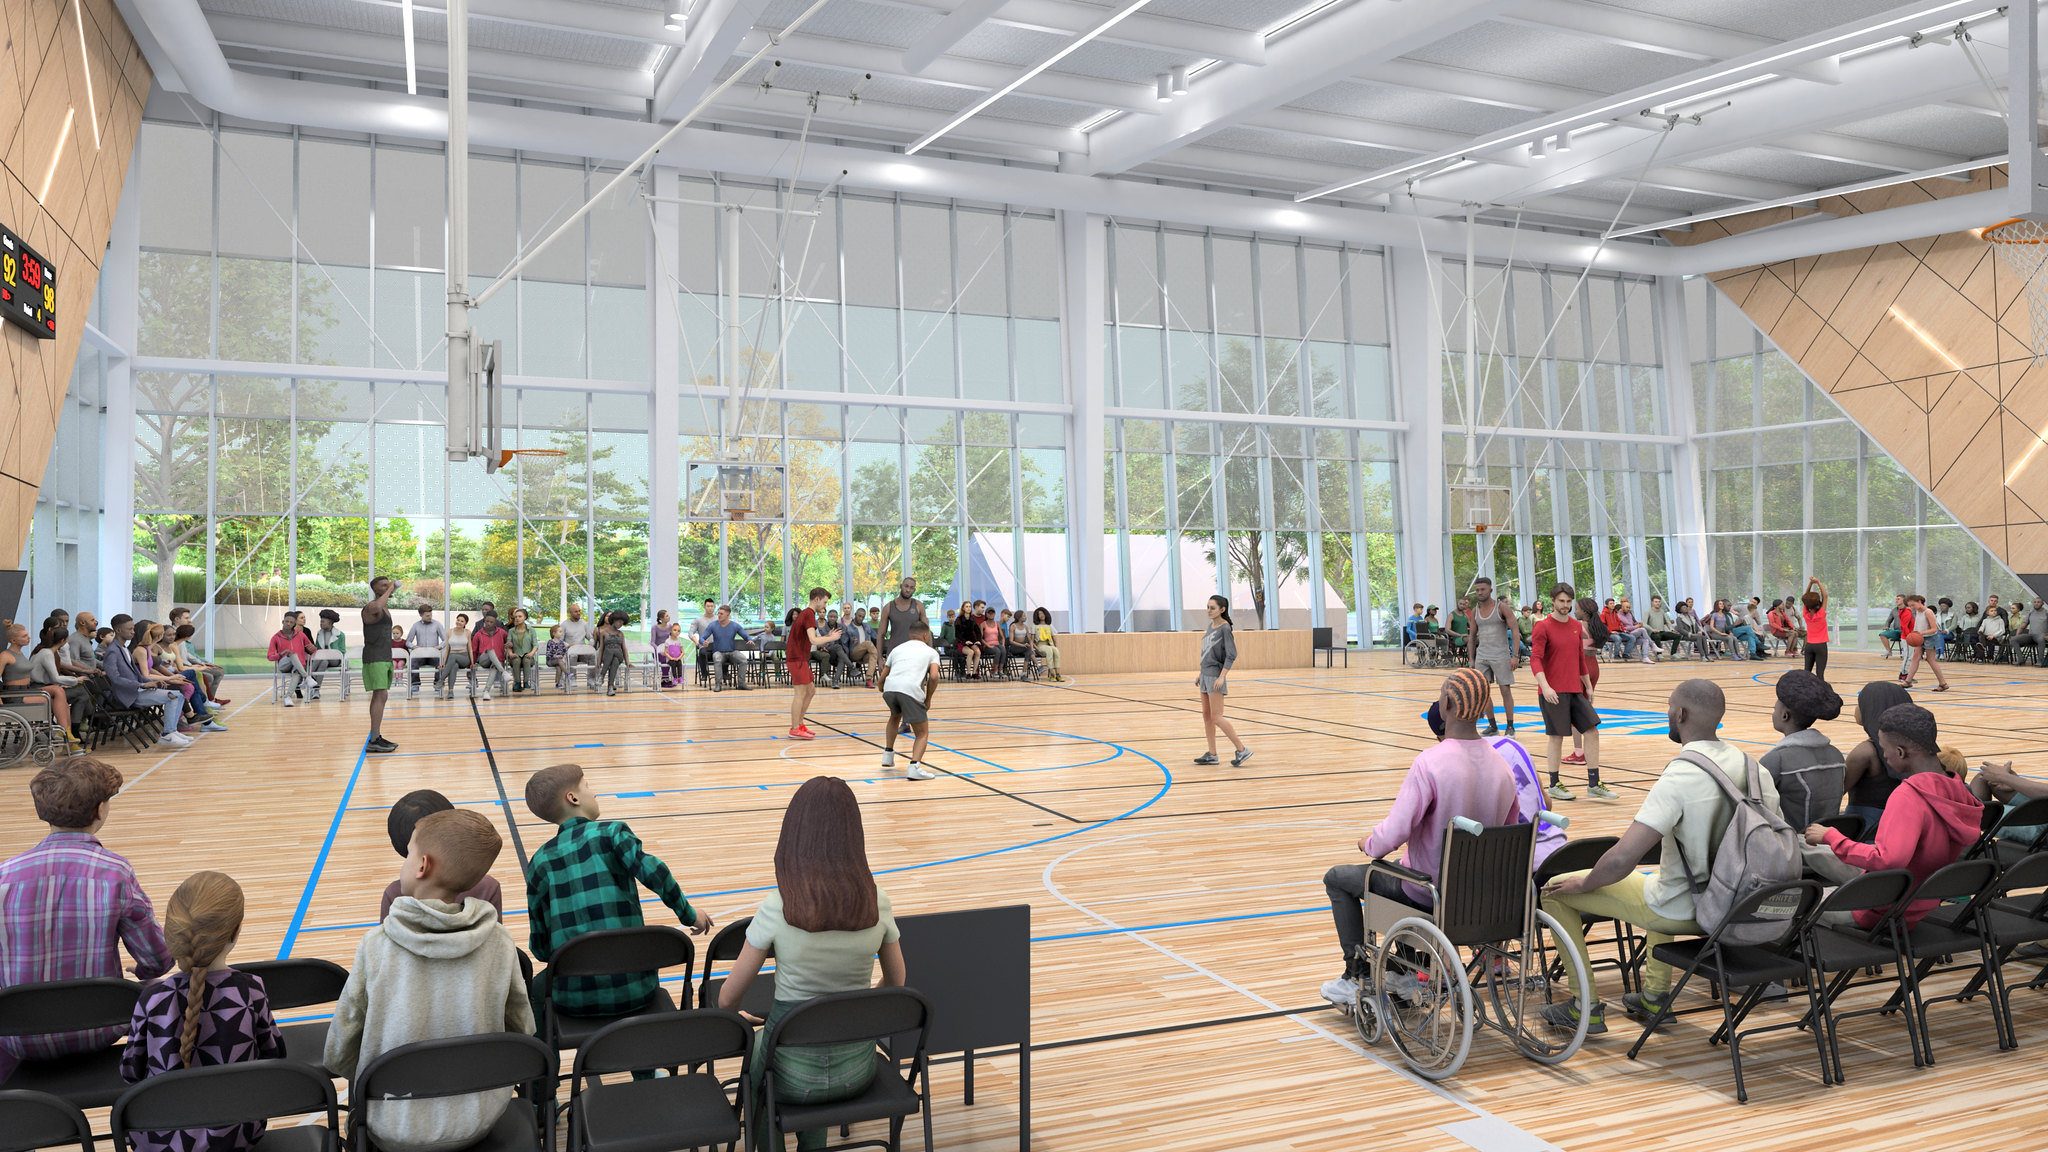 Multipurpose sports facility will be first completed space at Obama Presidential Center